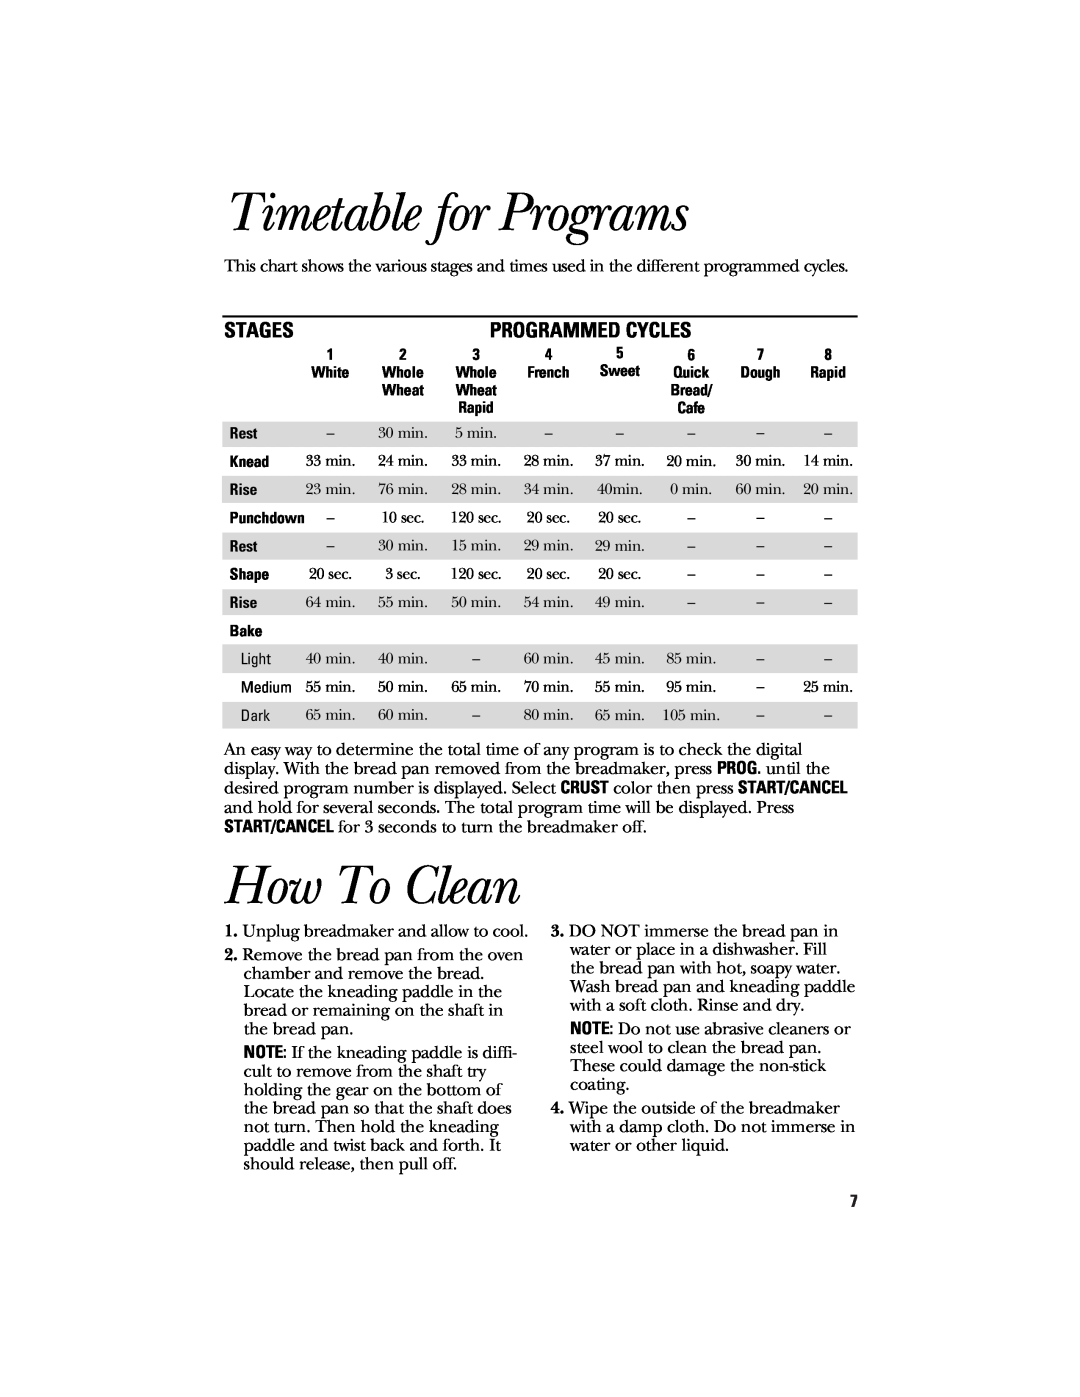 GE 840081600, 106732 quick start Timetable for Programs, Stages, Programmed Cycles, How To Clean 